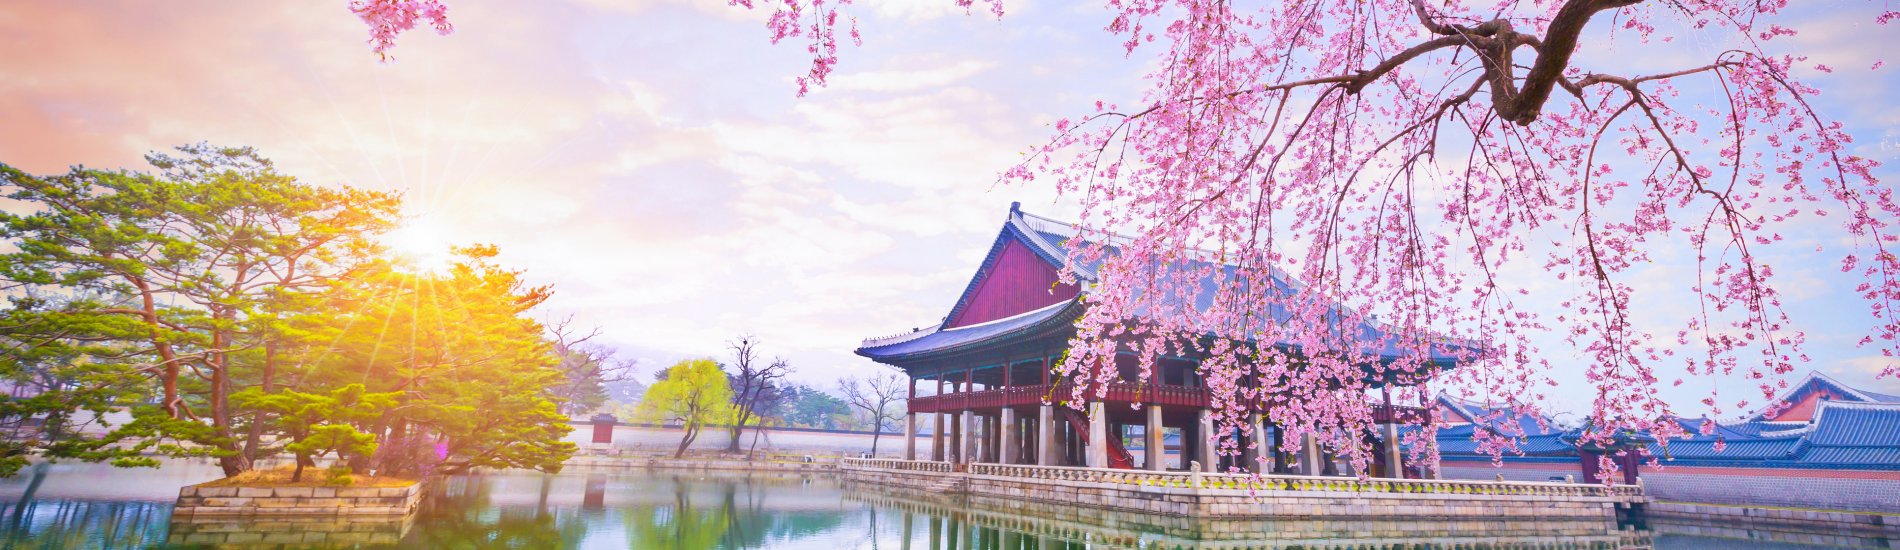 Gyeongbokgung palace with cherry blossom tree in spring time in Seoul, South Korea.